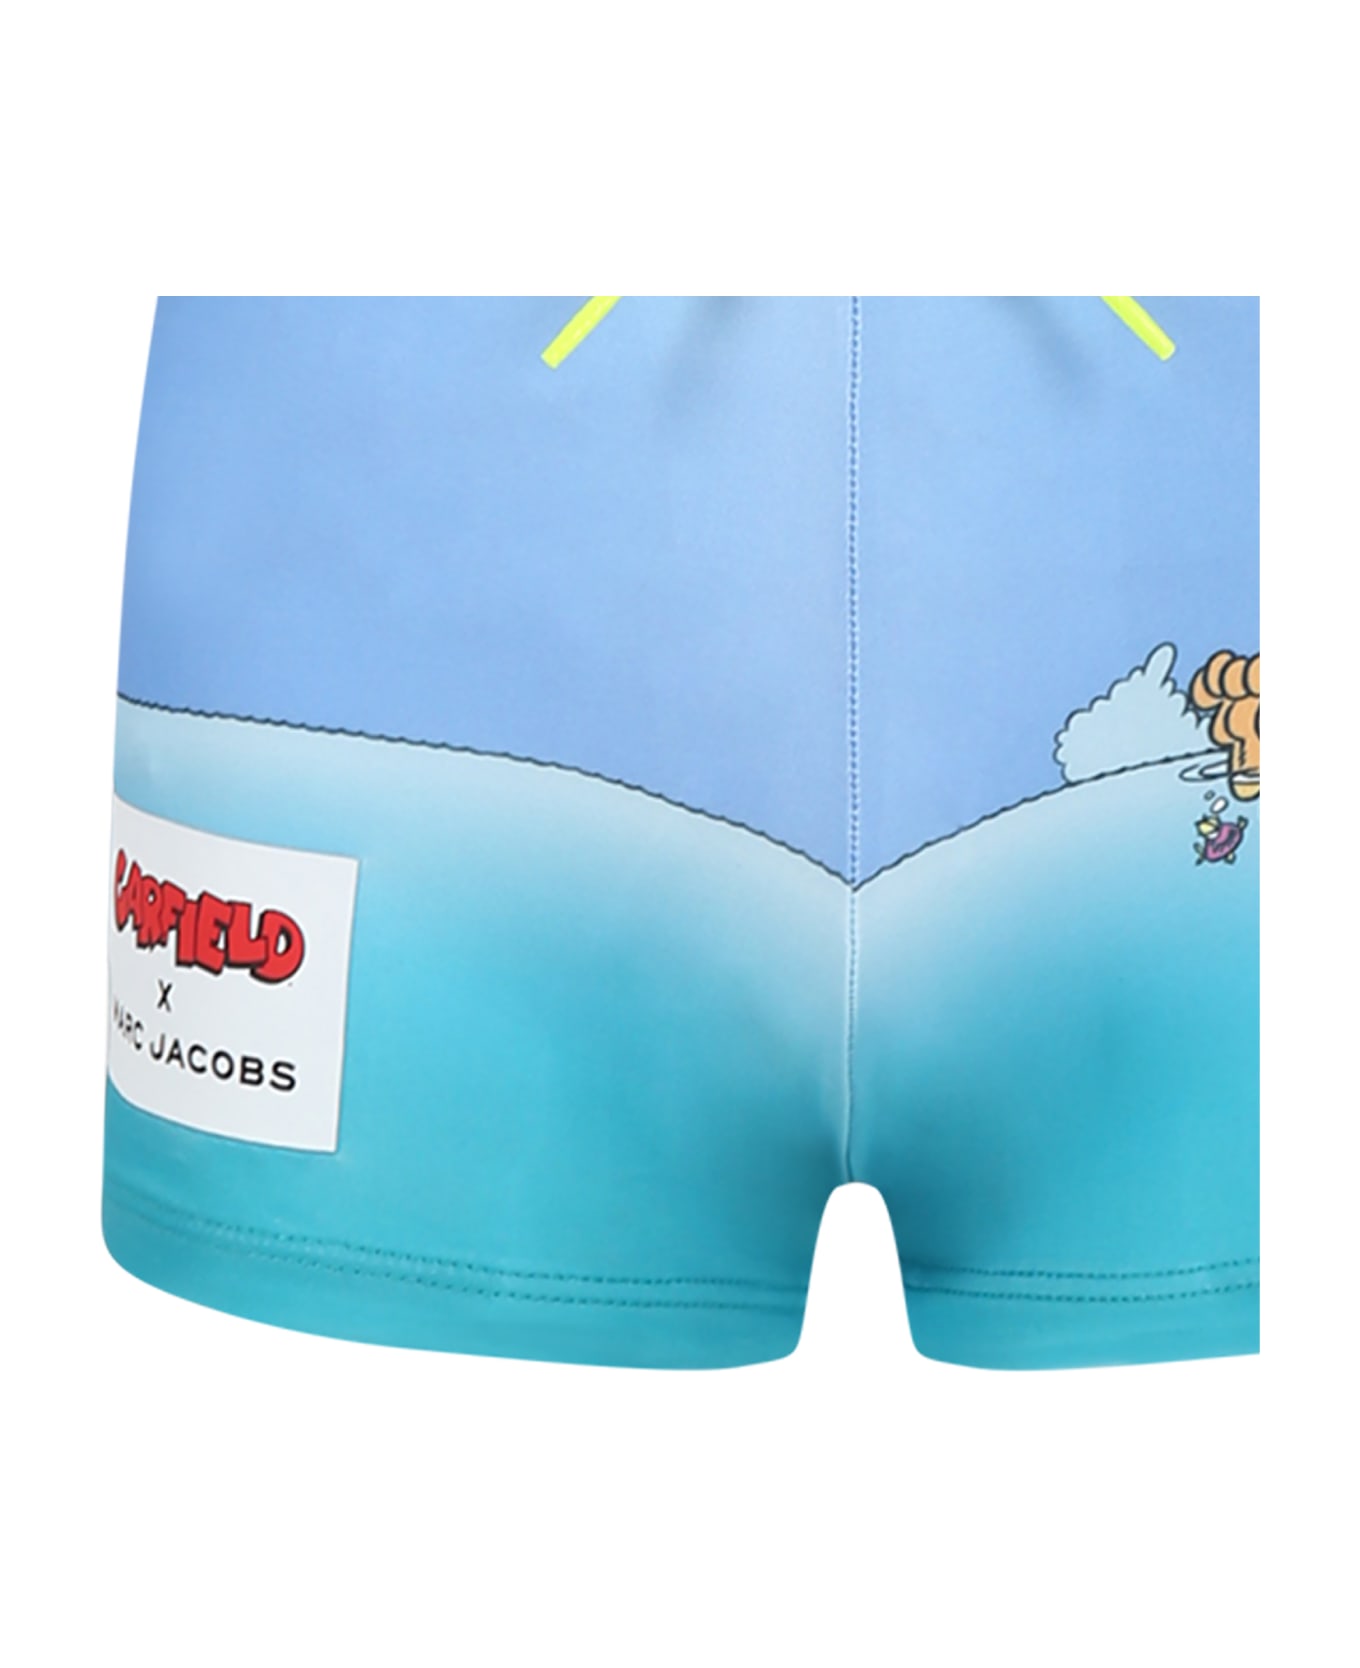 Marc Jacobs Light Blue Swim Boxer For Boy With Garfield And Logo - Multicolor 水着